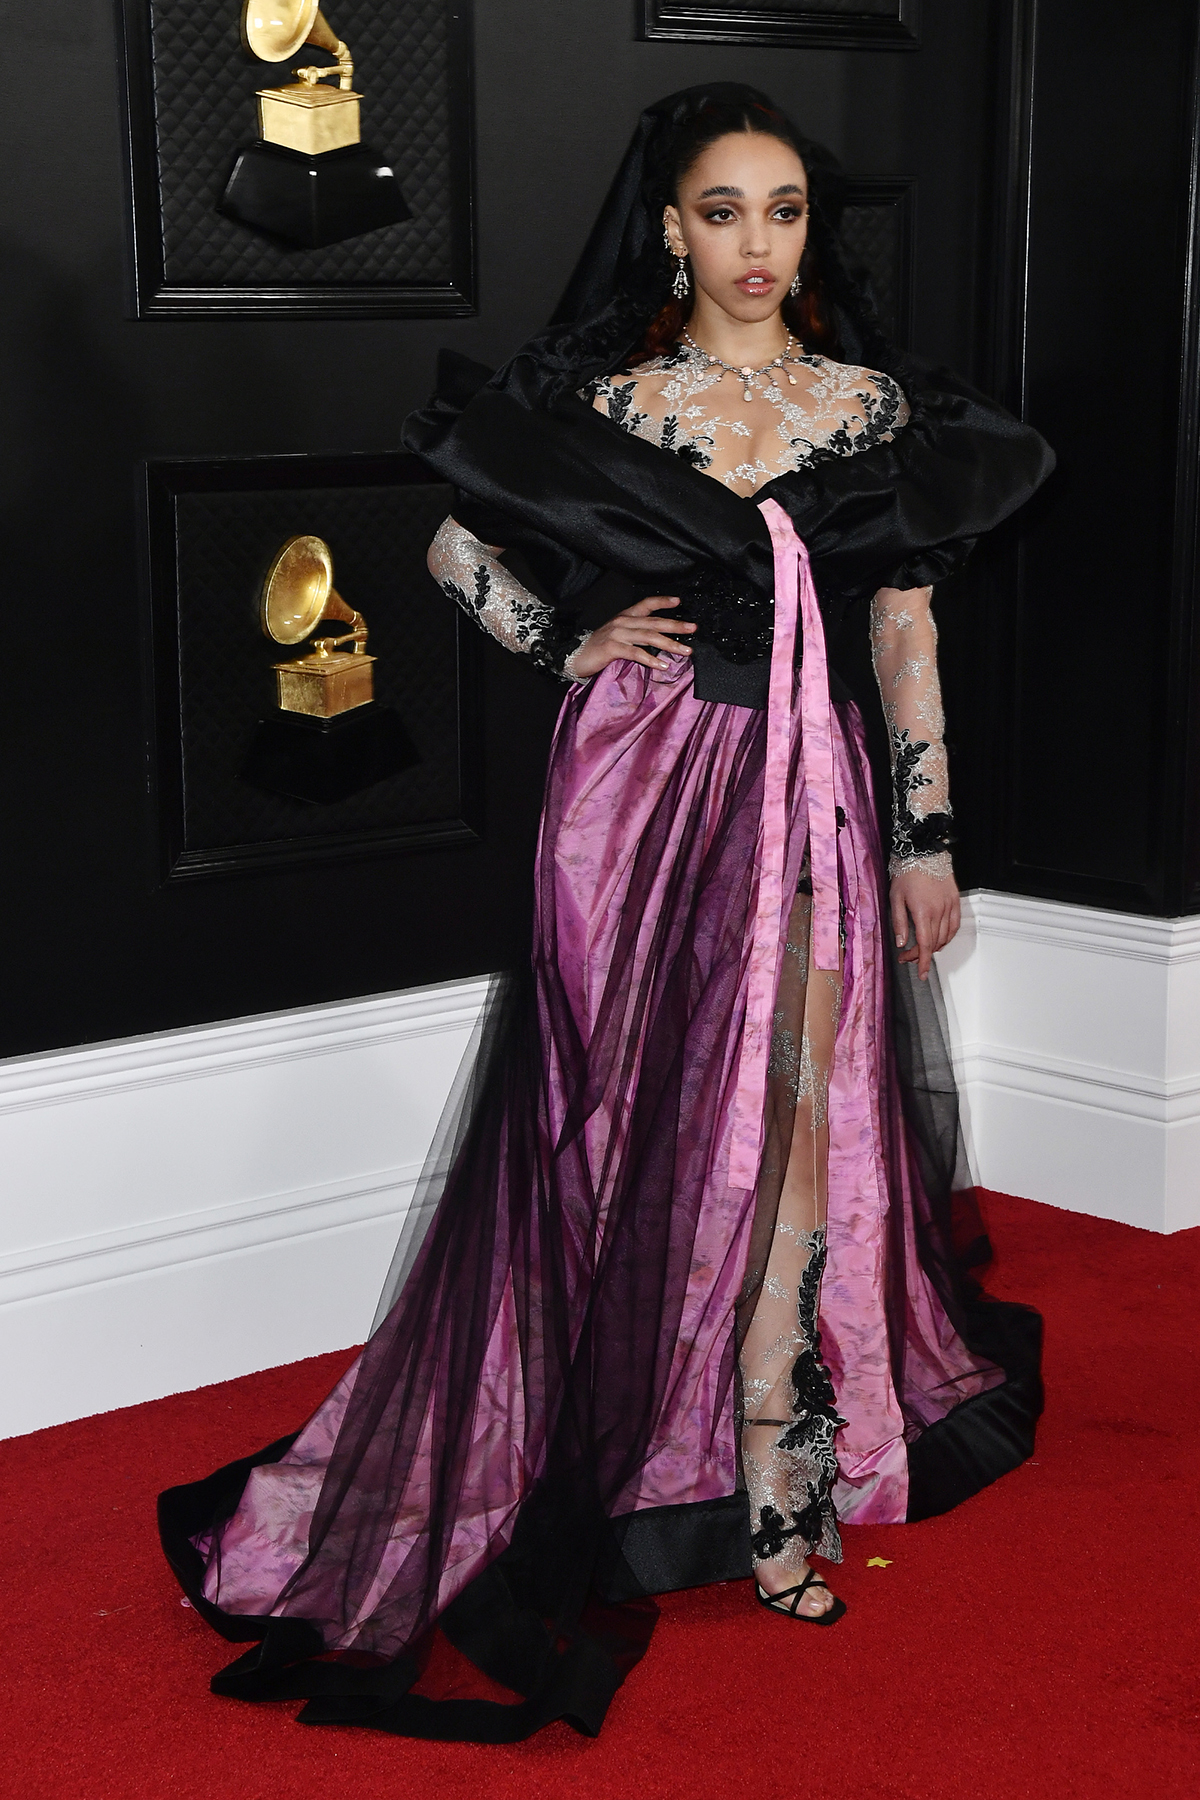 FKA Twigs at the grammys